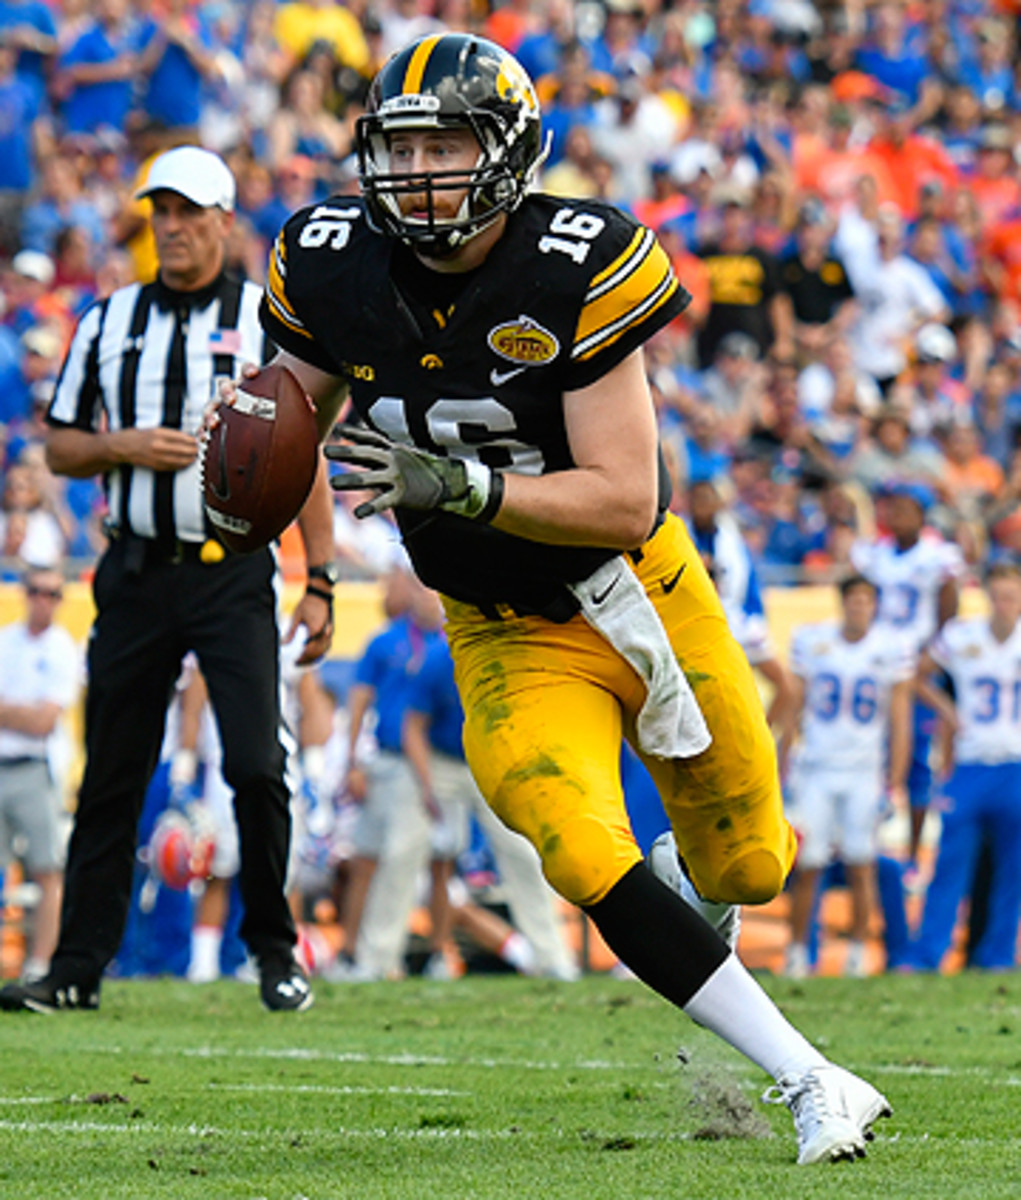 C.J. Beathard started at quarterback his final two seasons at Iowa and led the Hawkeyes to the Rose Bowl in 2015.